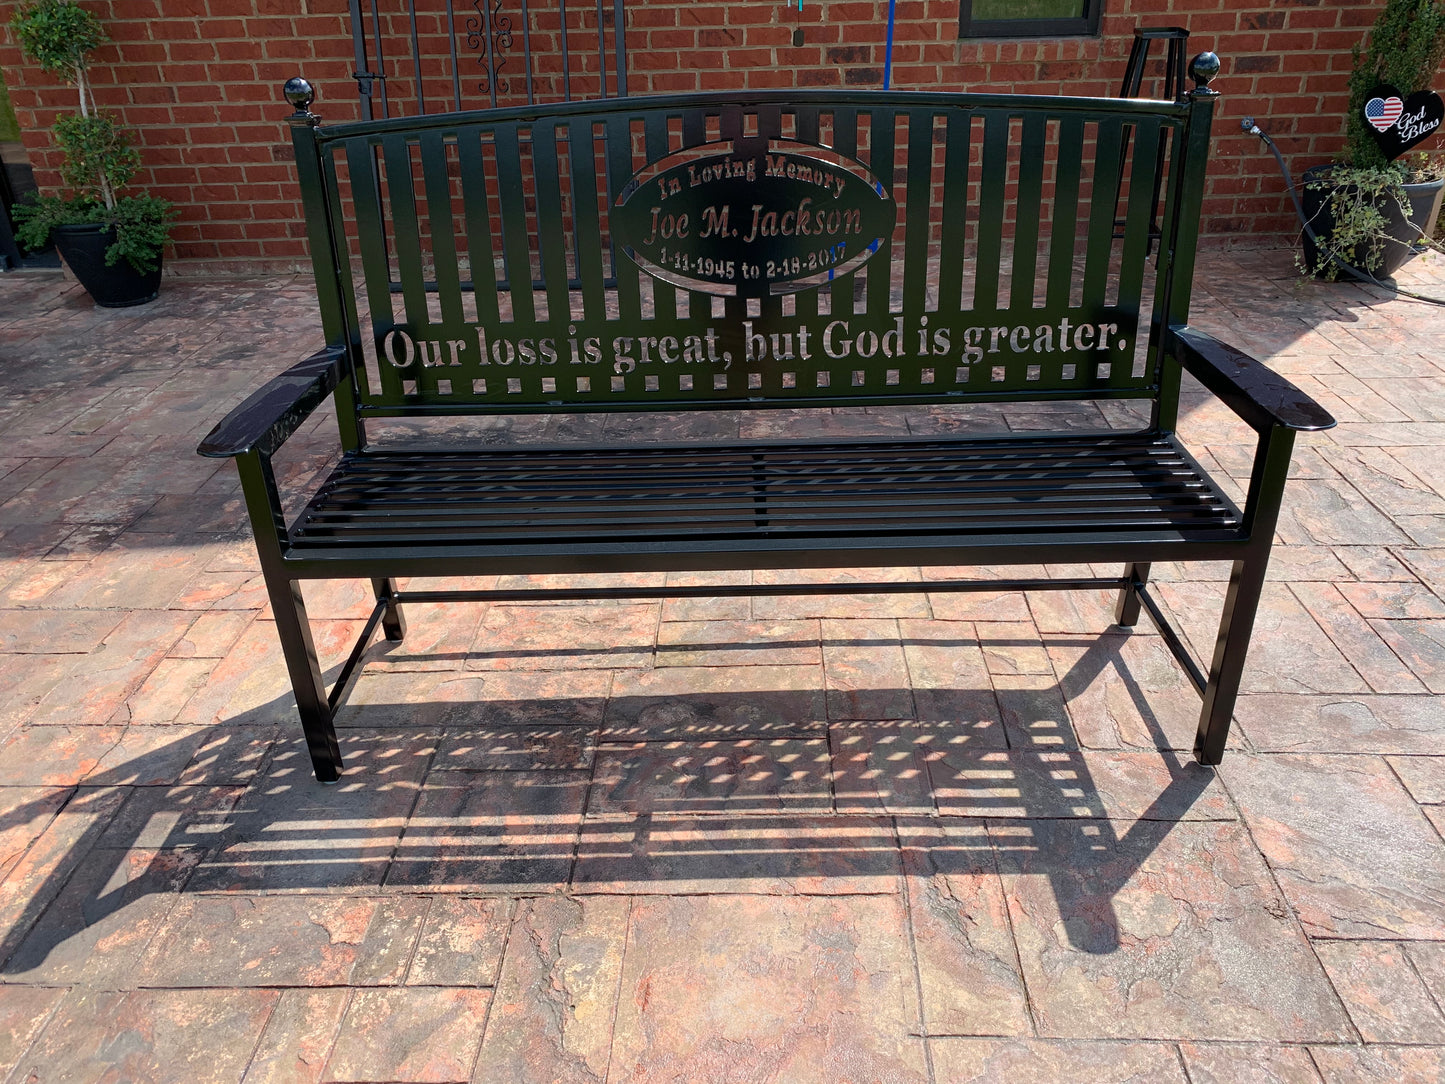 Custom Metal Bench Powder Coated Your color choice- Your design choice in back of bench.